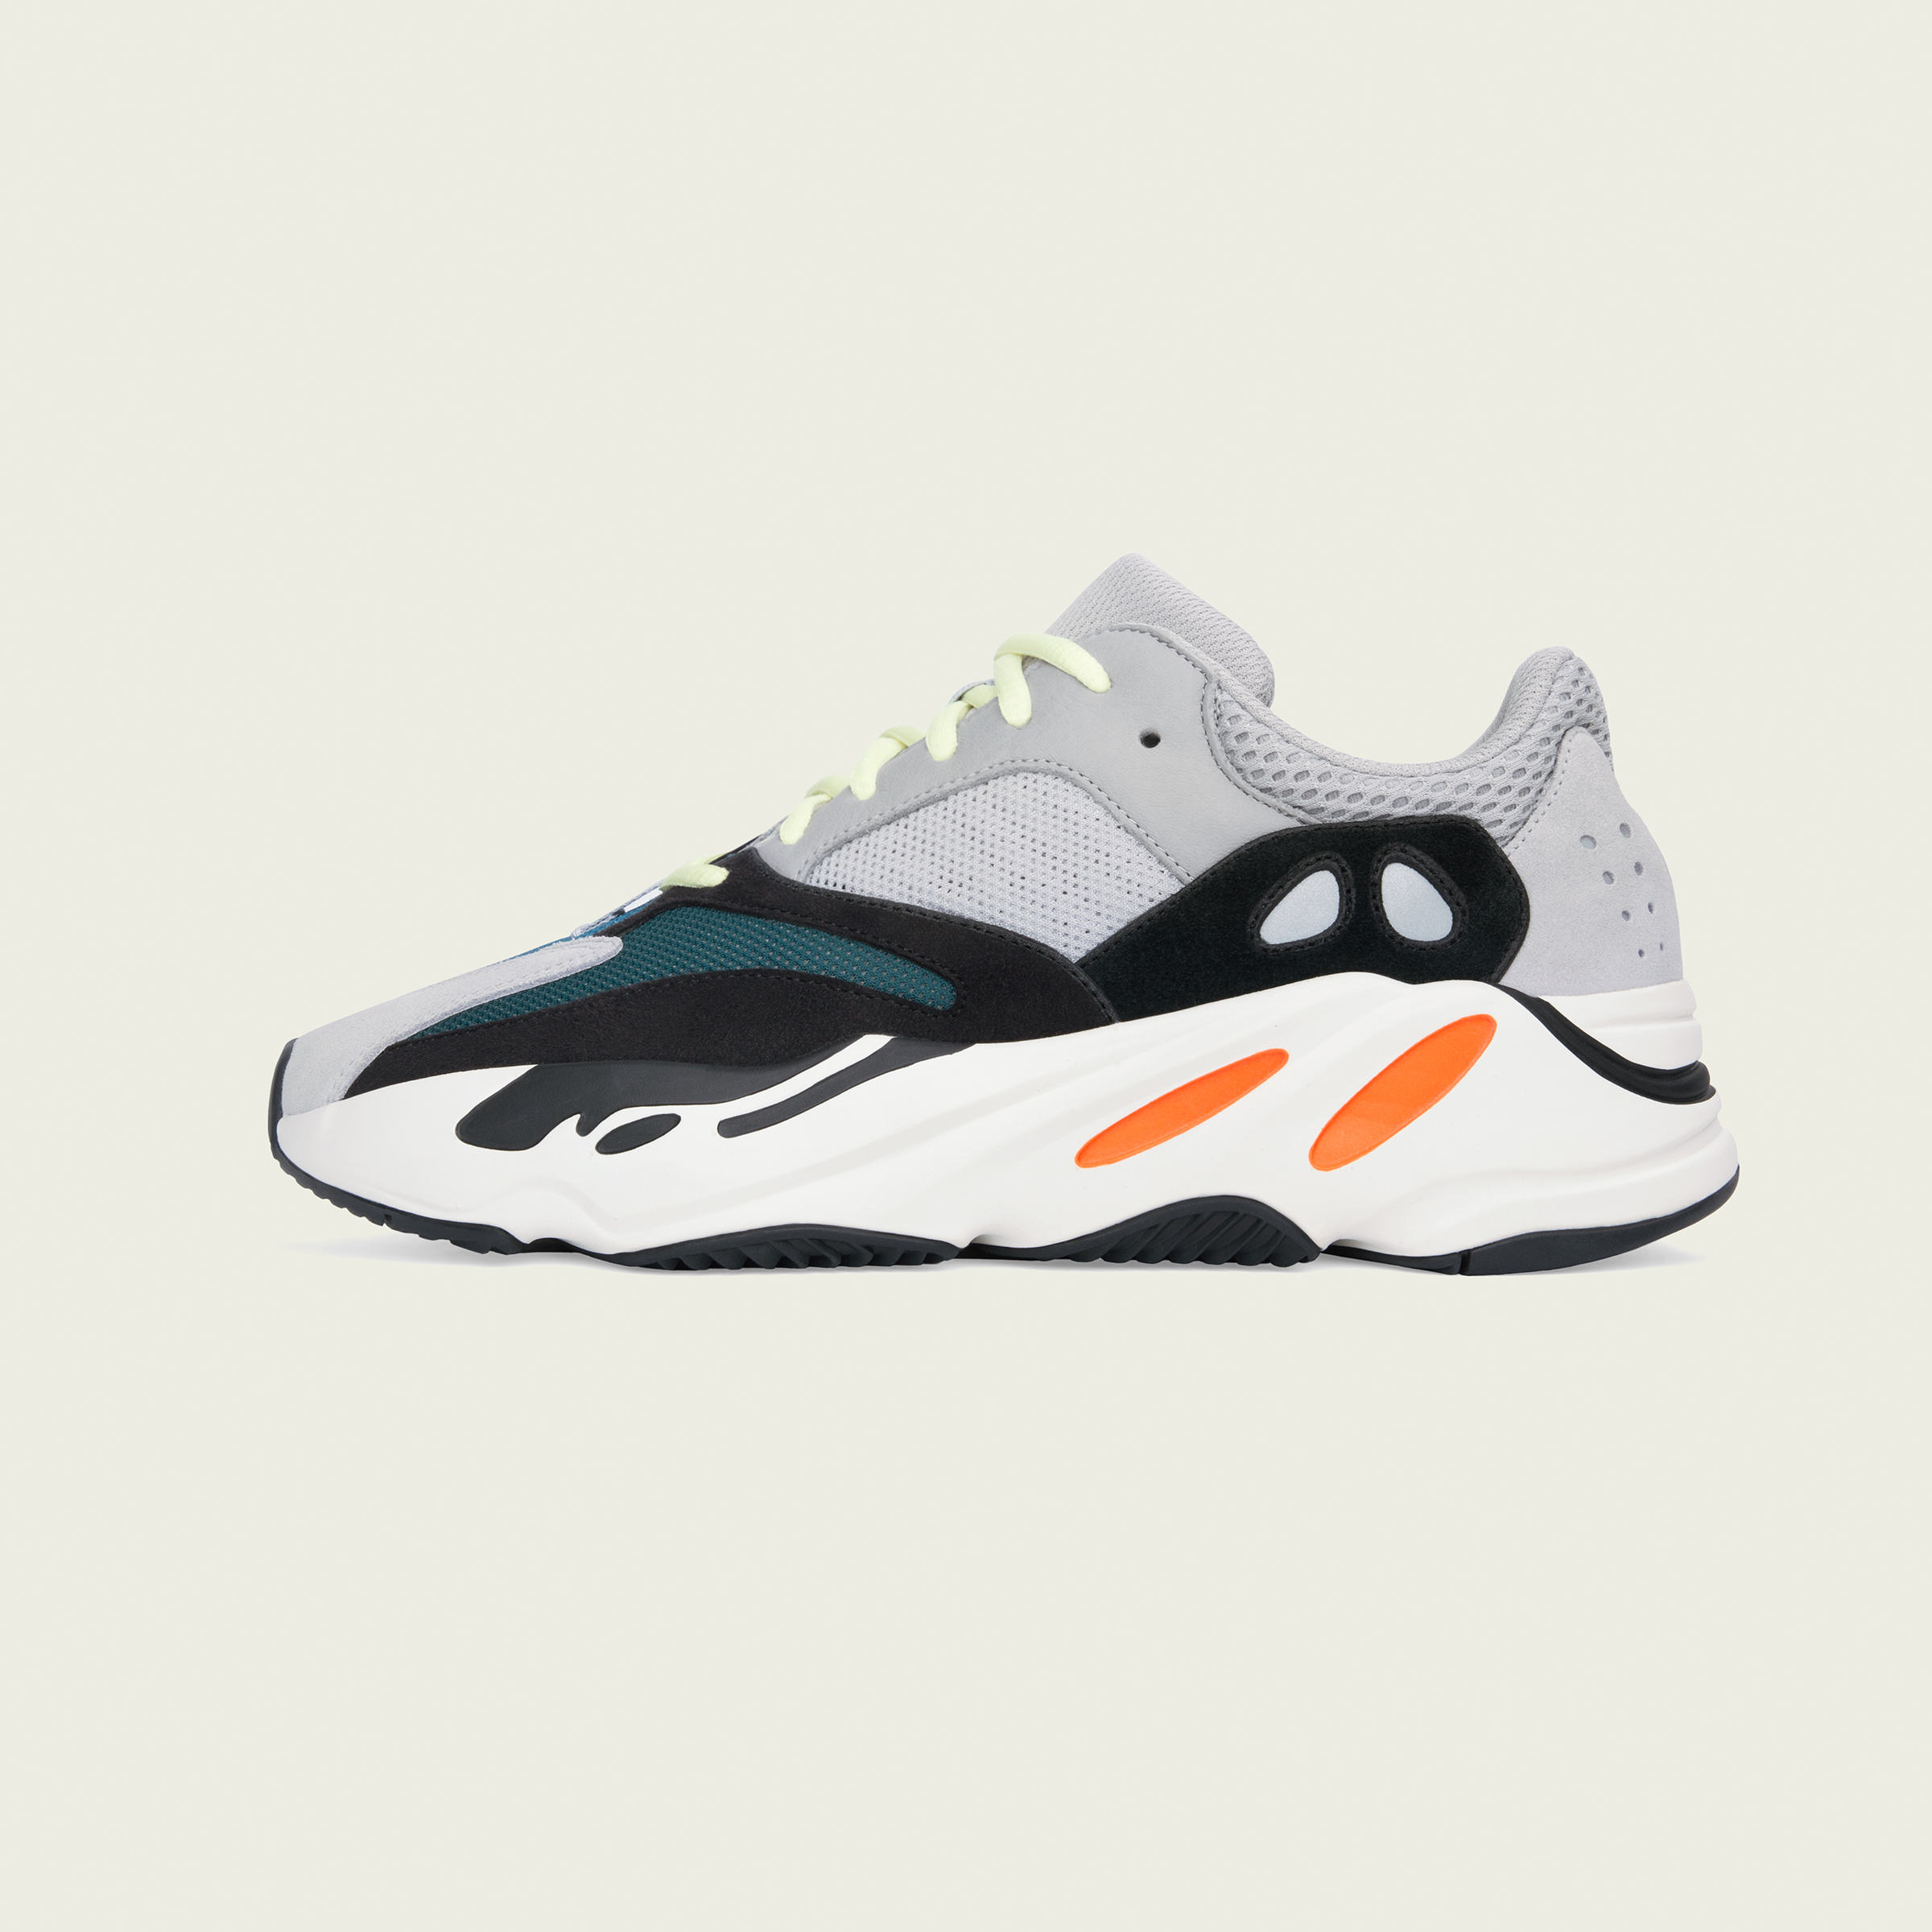 IN PHOTOS: adidas + Kanye West Announce the New Yeezy Boost 700 - Rank ...